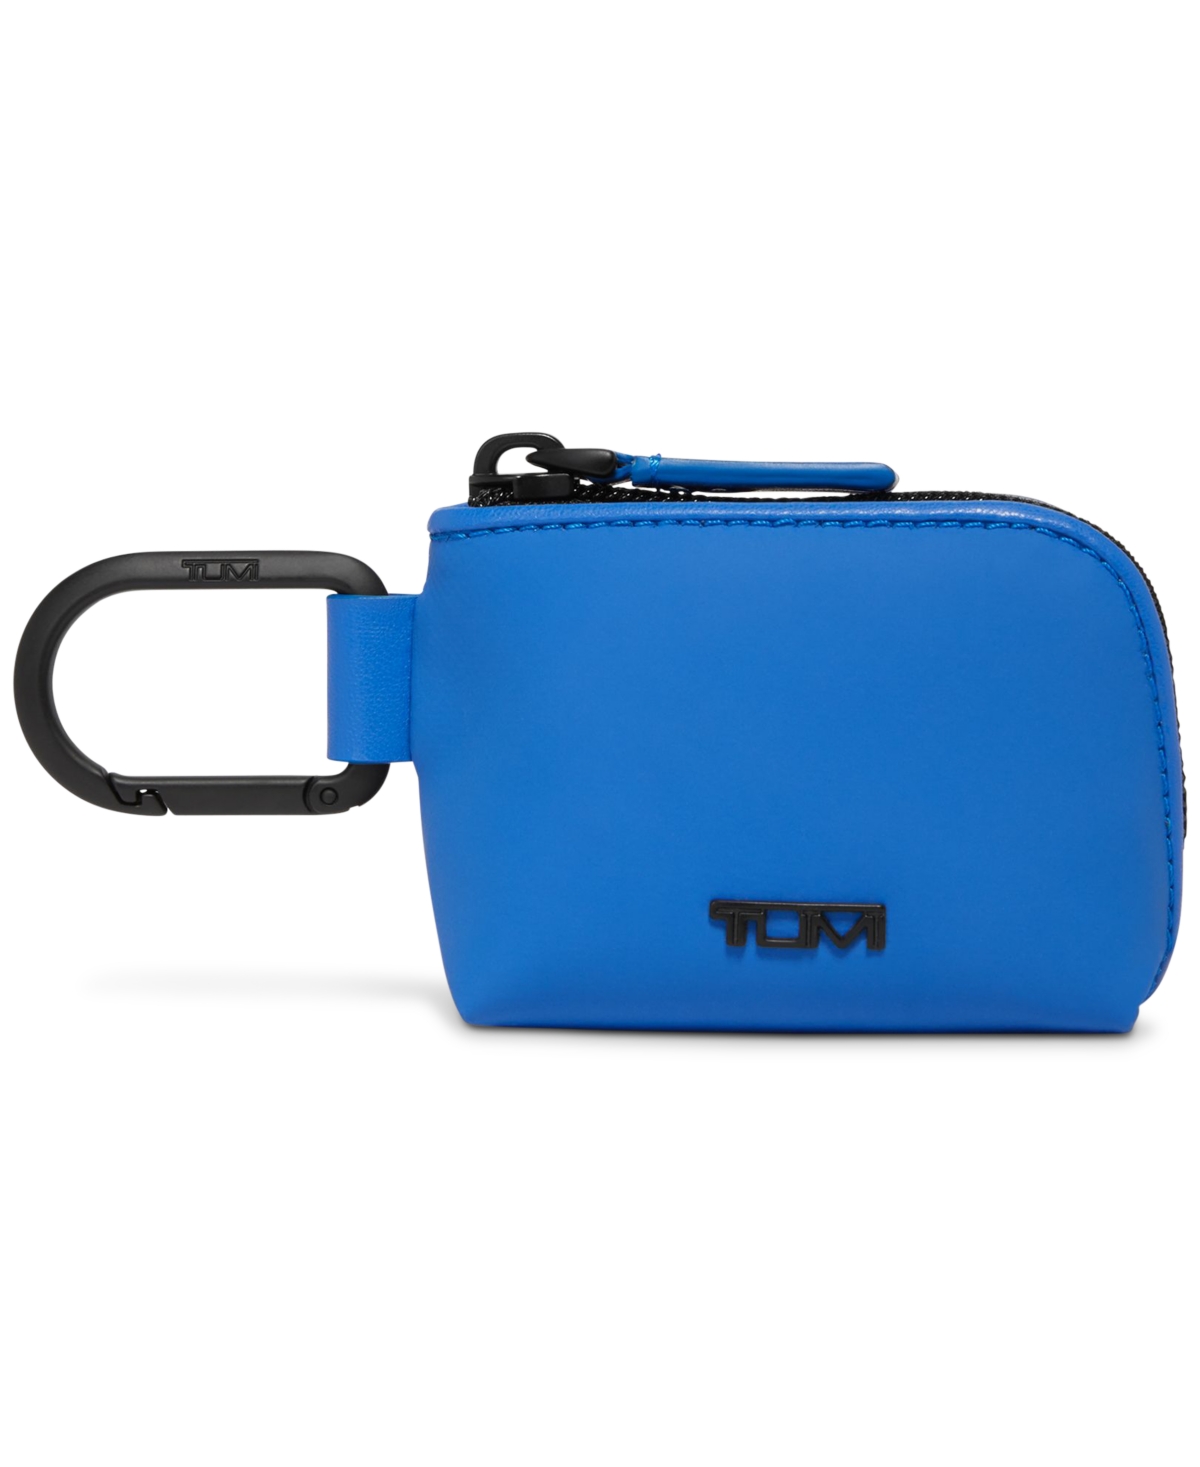 Tumi Men's Extra Small Pouch In Lapis Blue